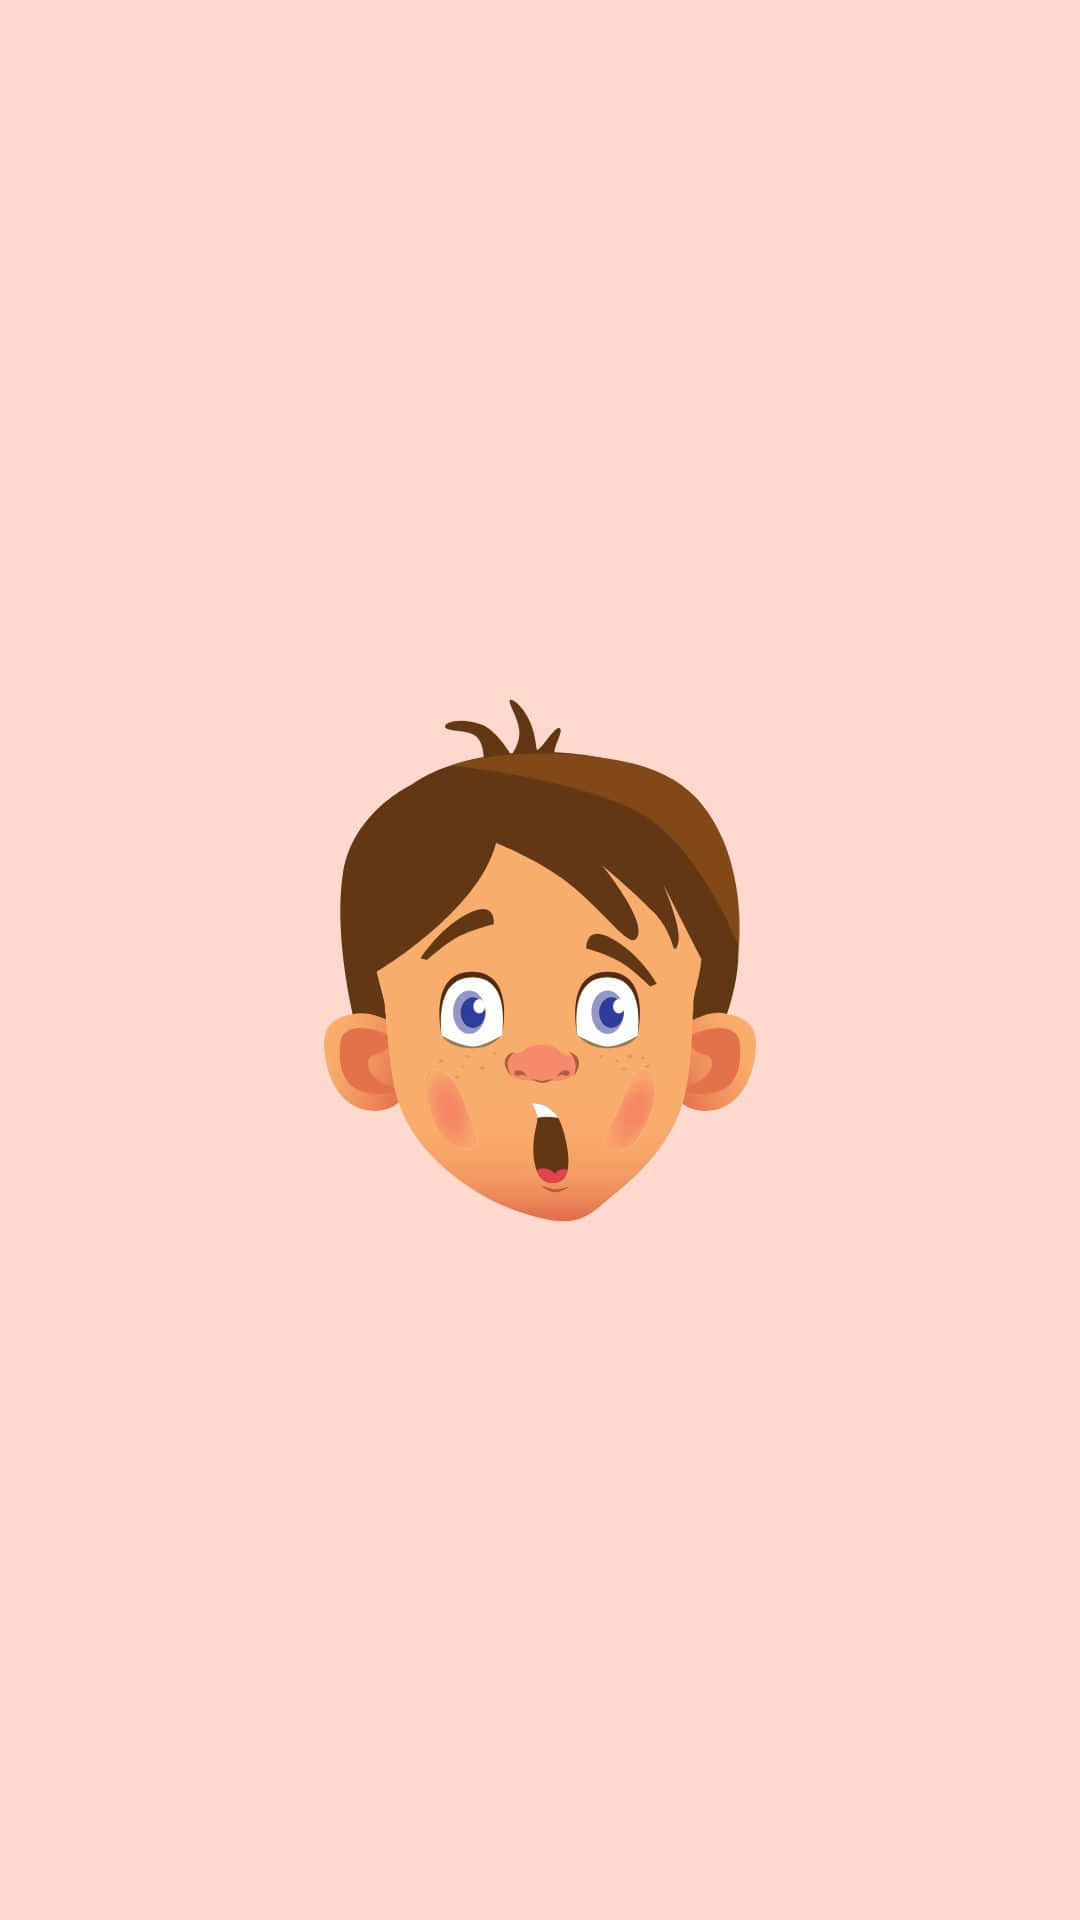 Handsome Boy Cartoon With Shocked Expression Background